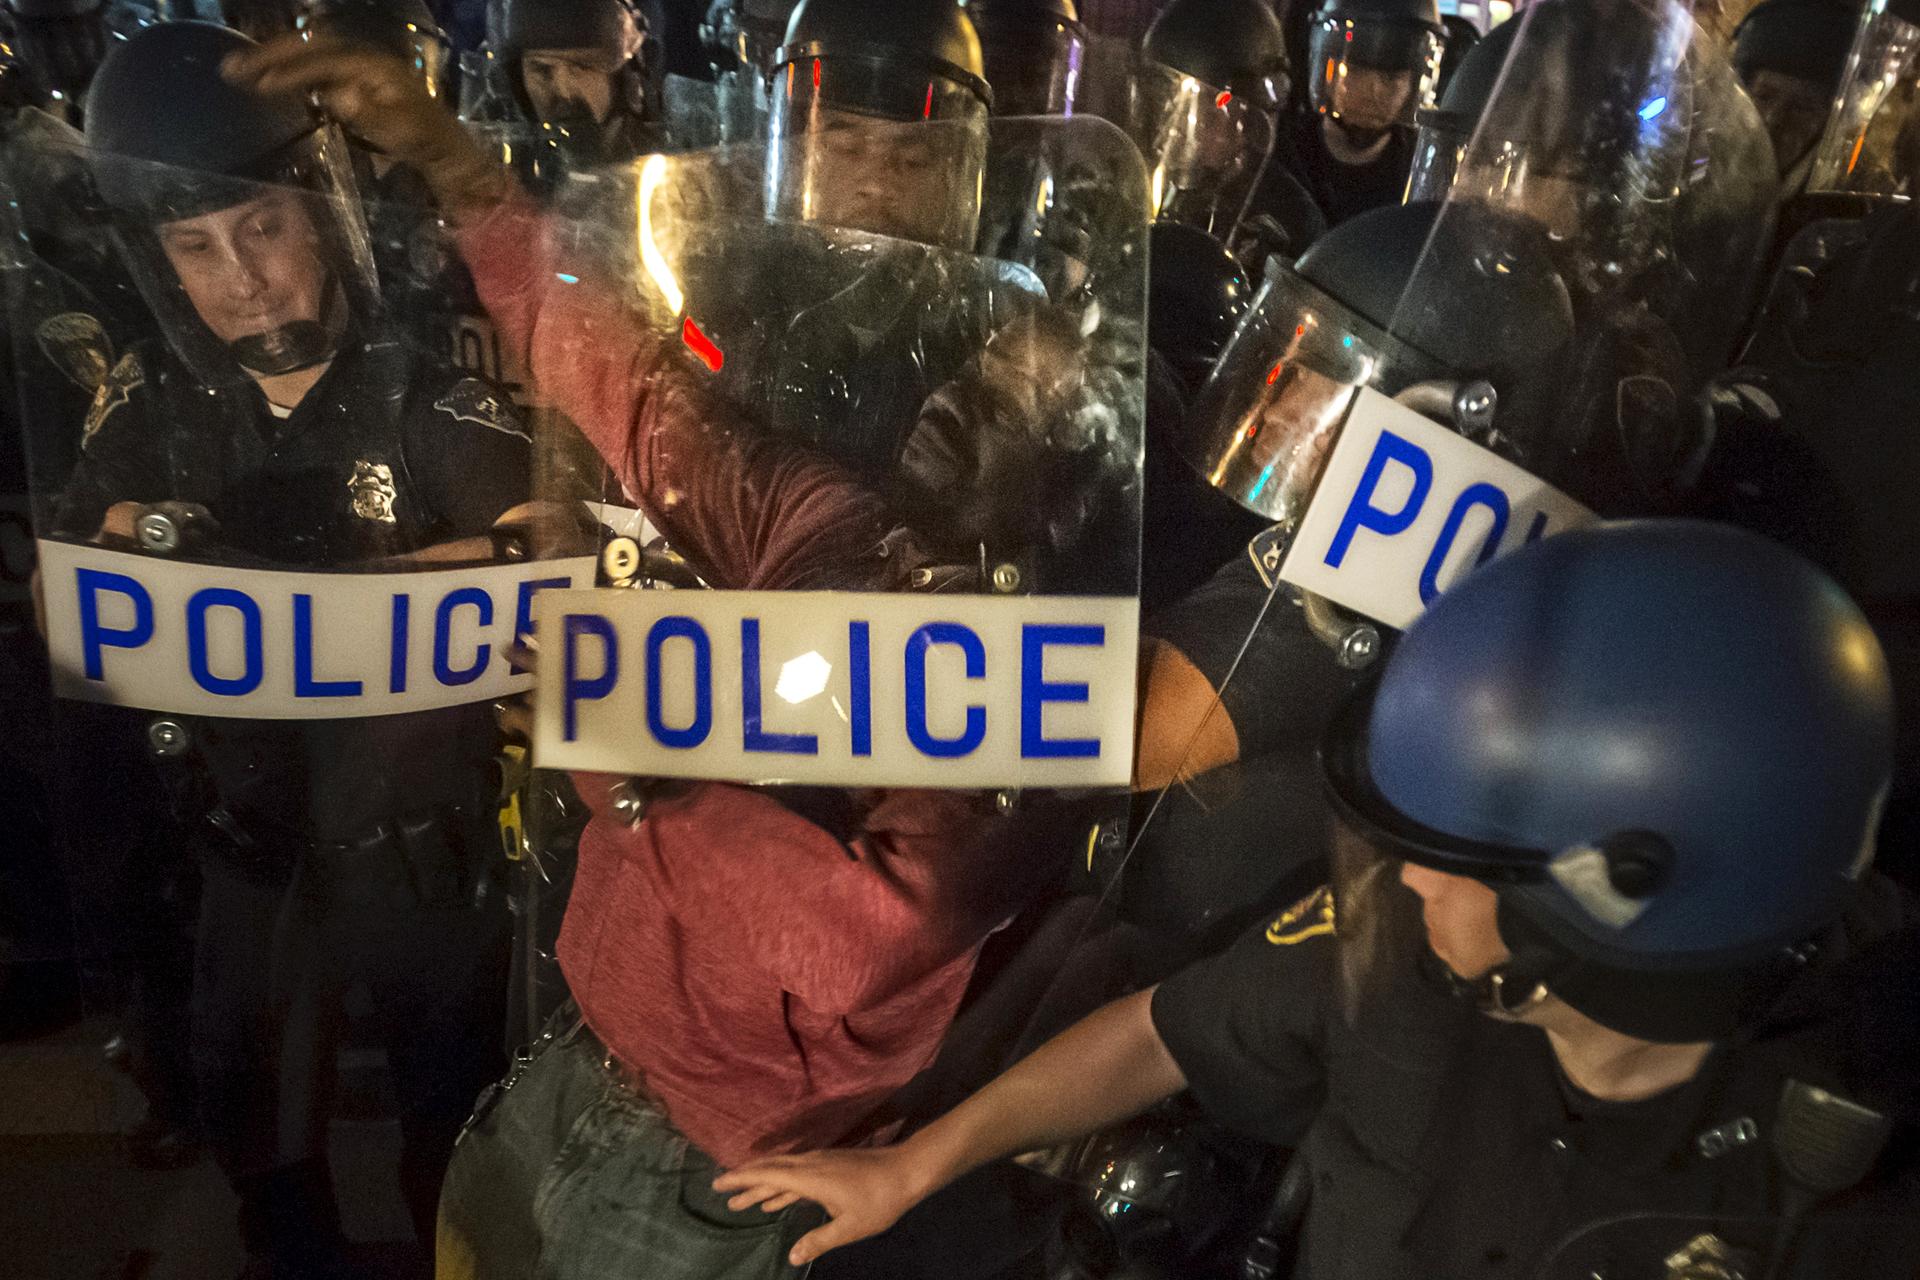 A man, protesting the death of Freddie Gray, is detained by police after defying a curfew in Baltimore, Maryland April 30, 2015.